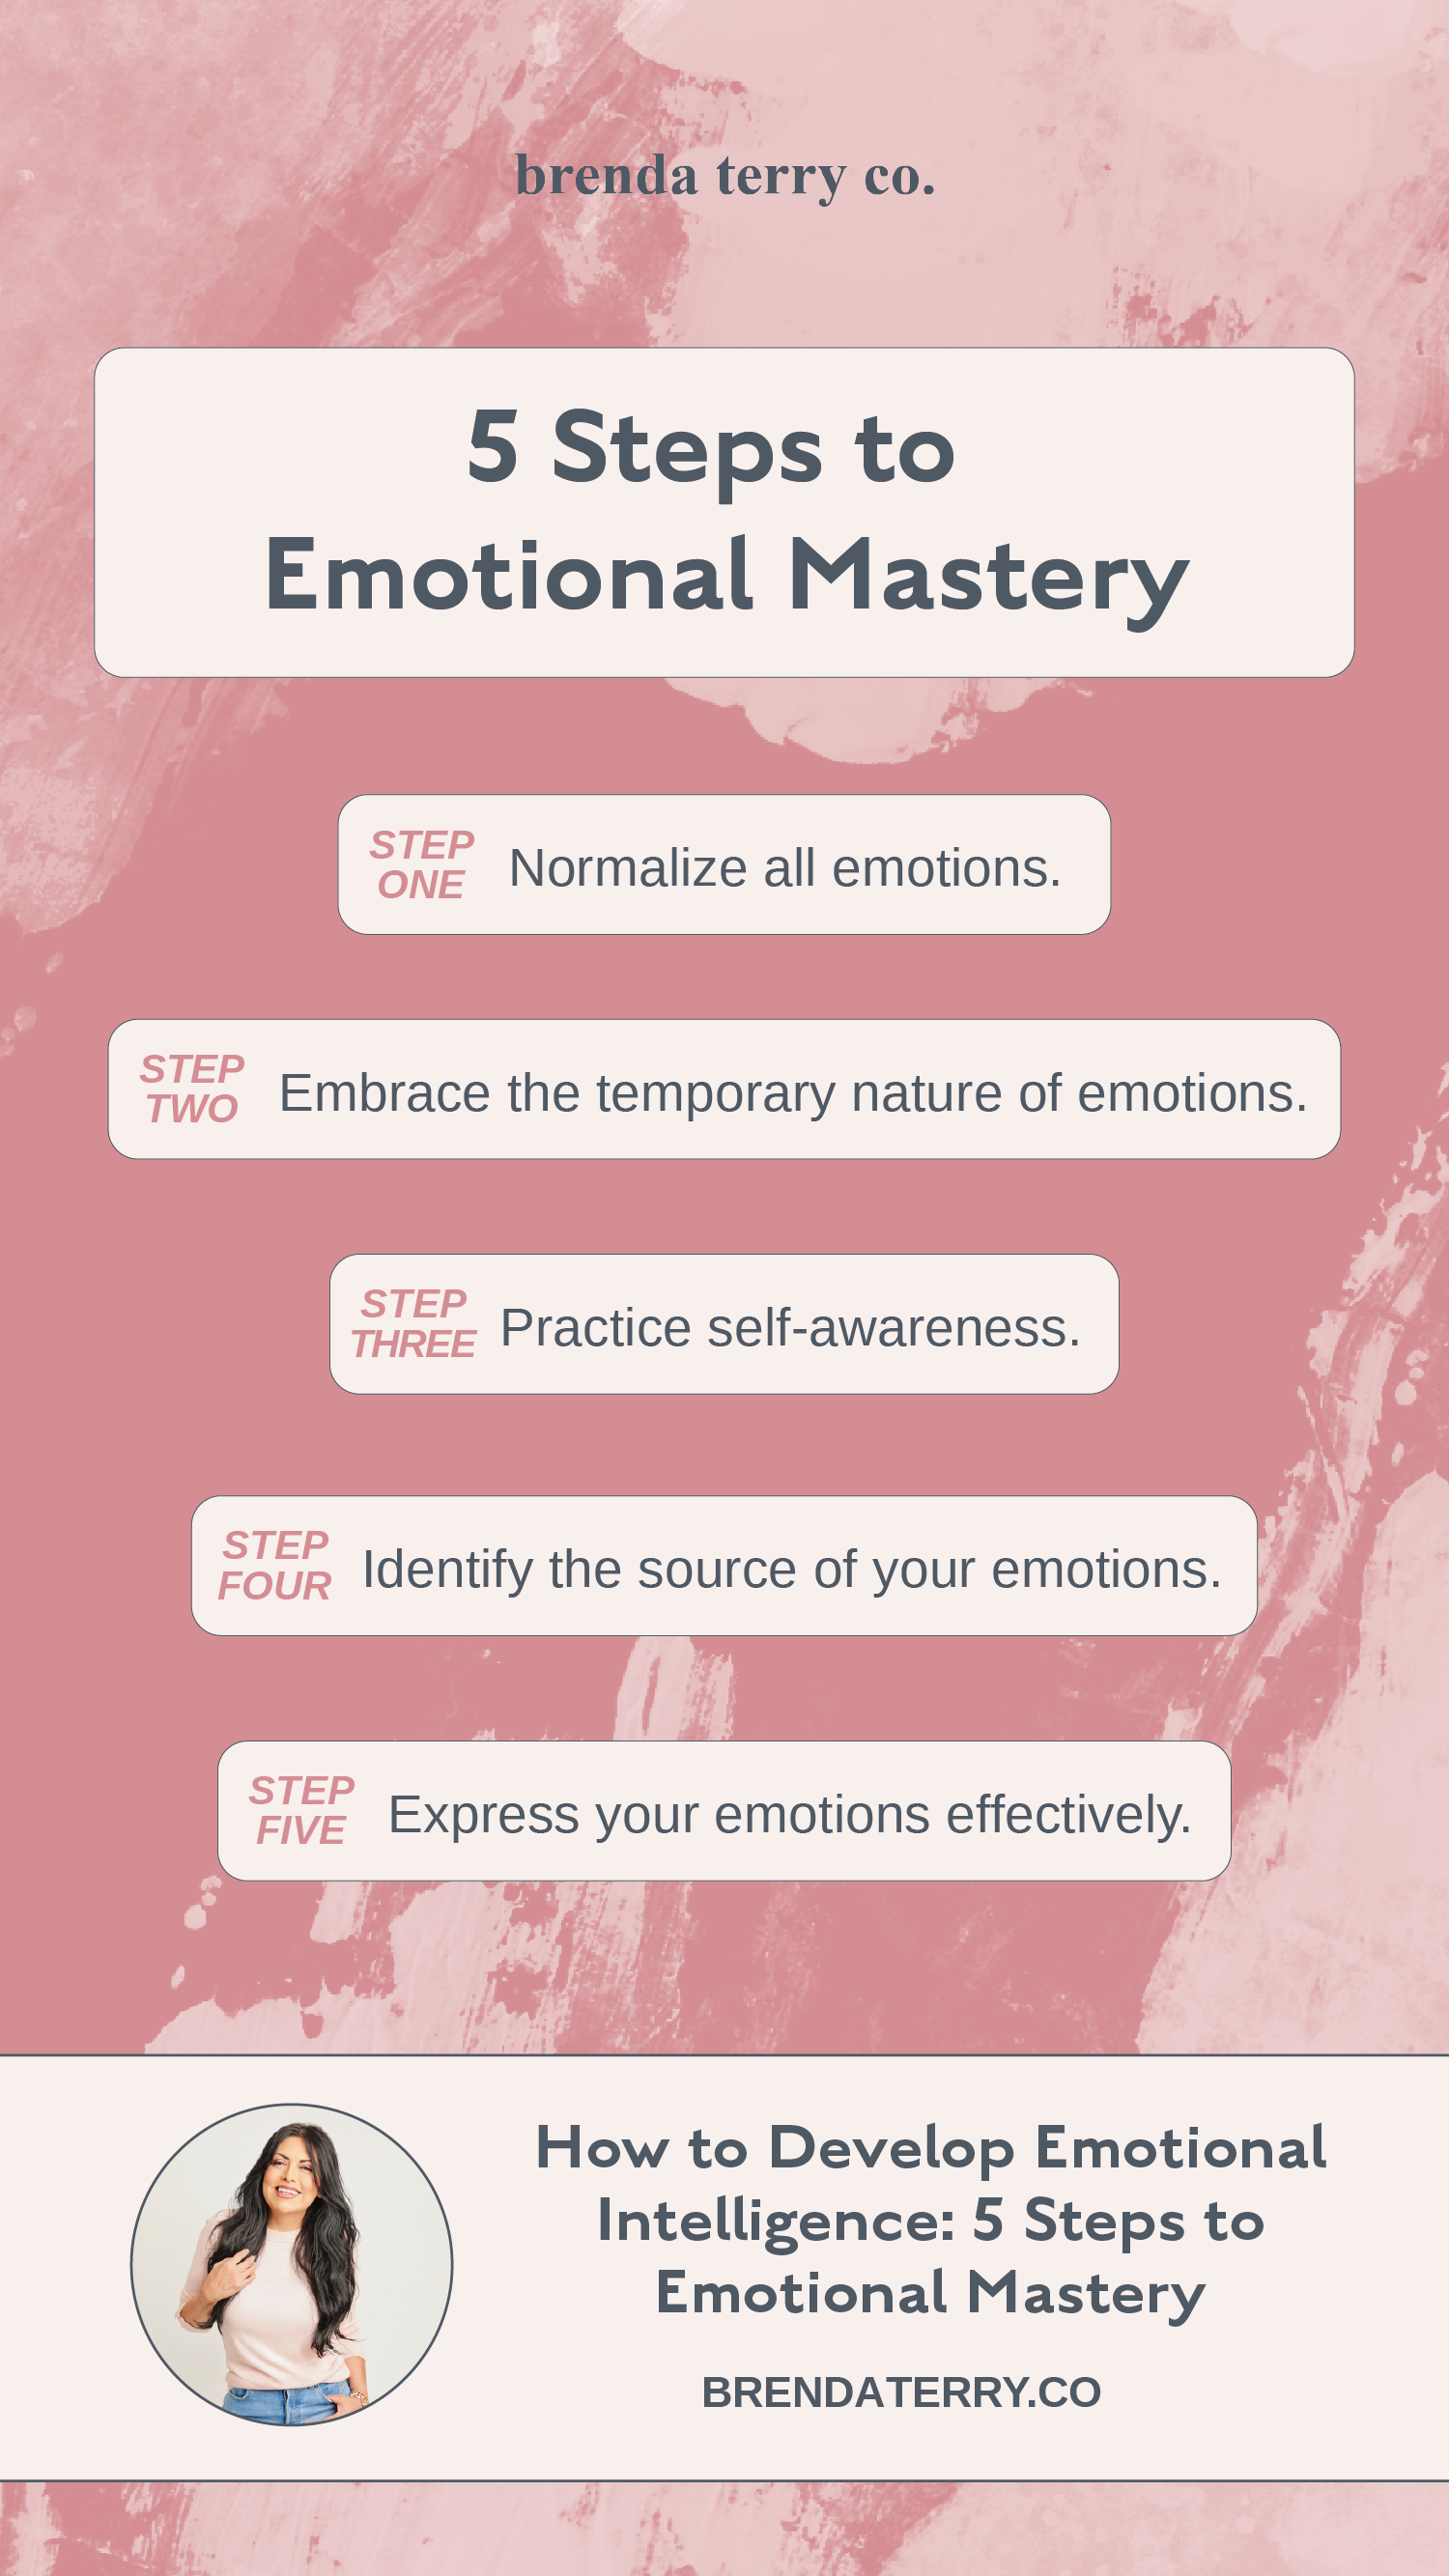 5 Steps to Emotional Mastery